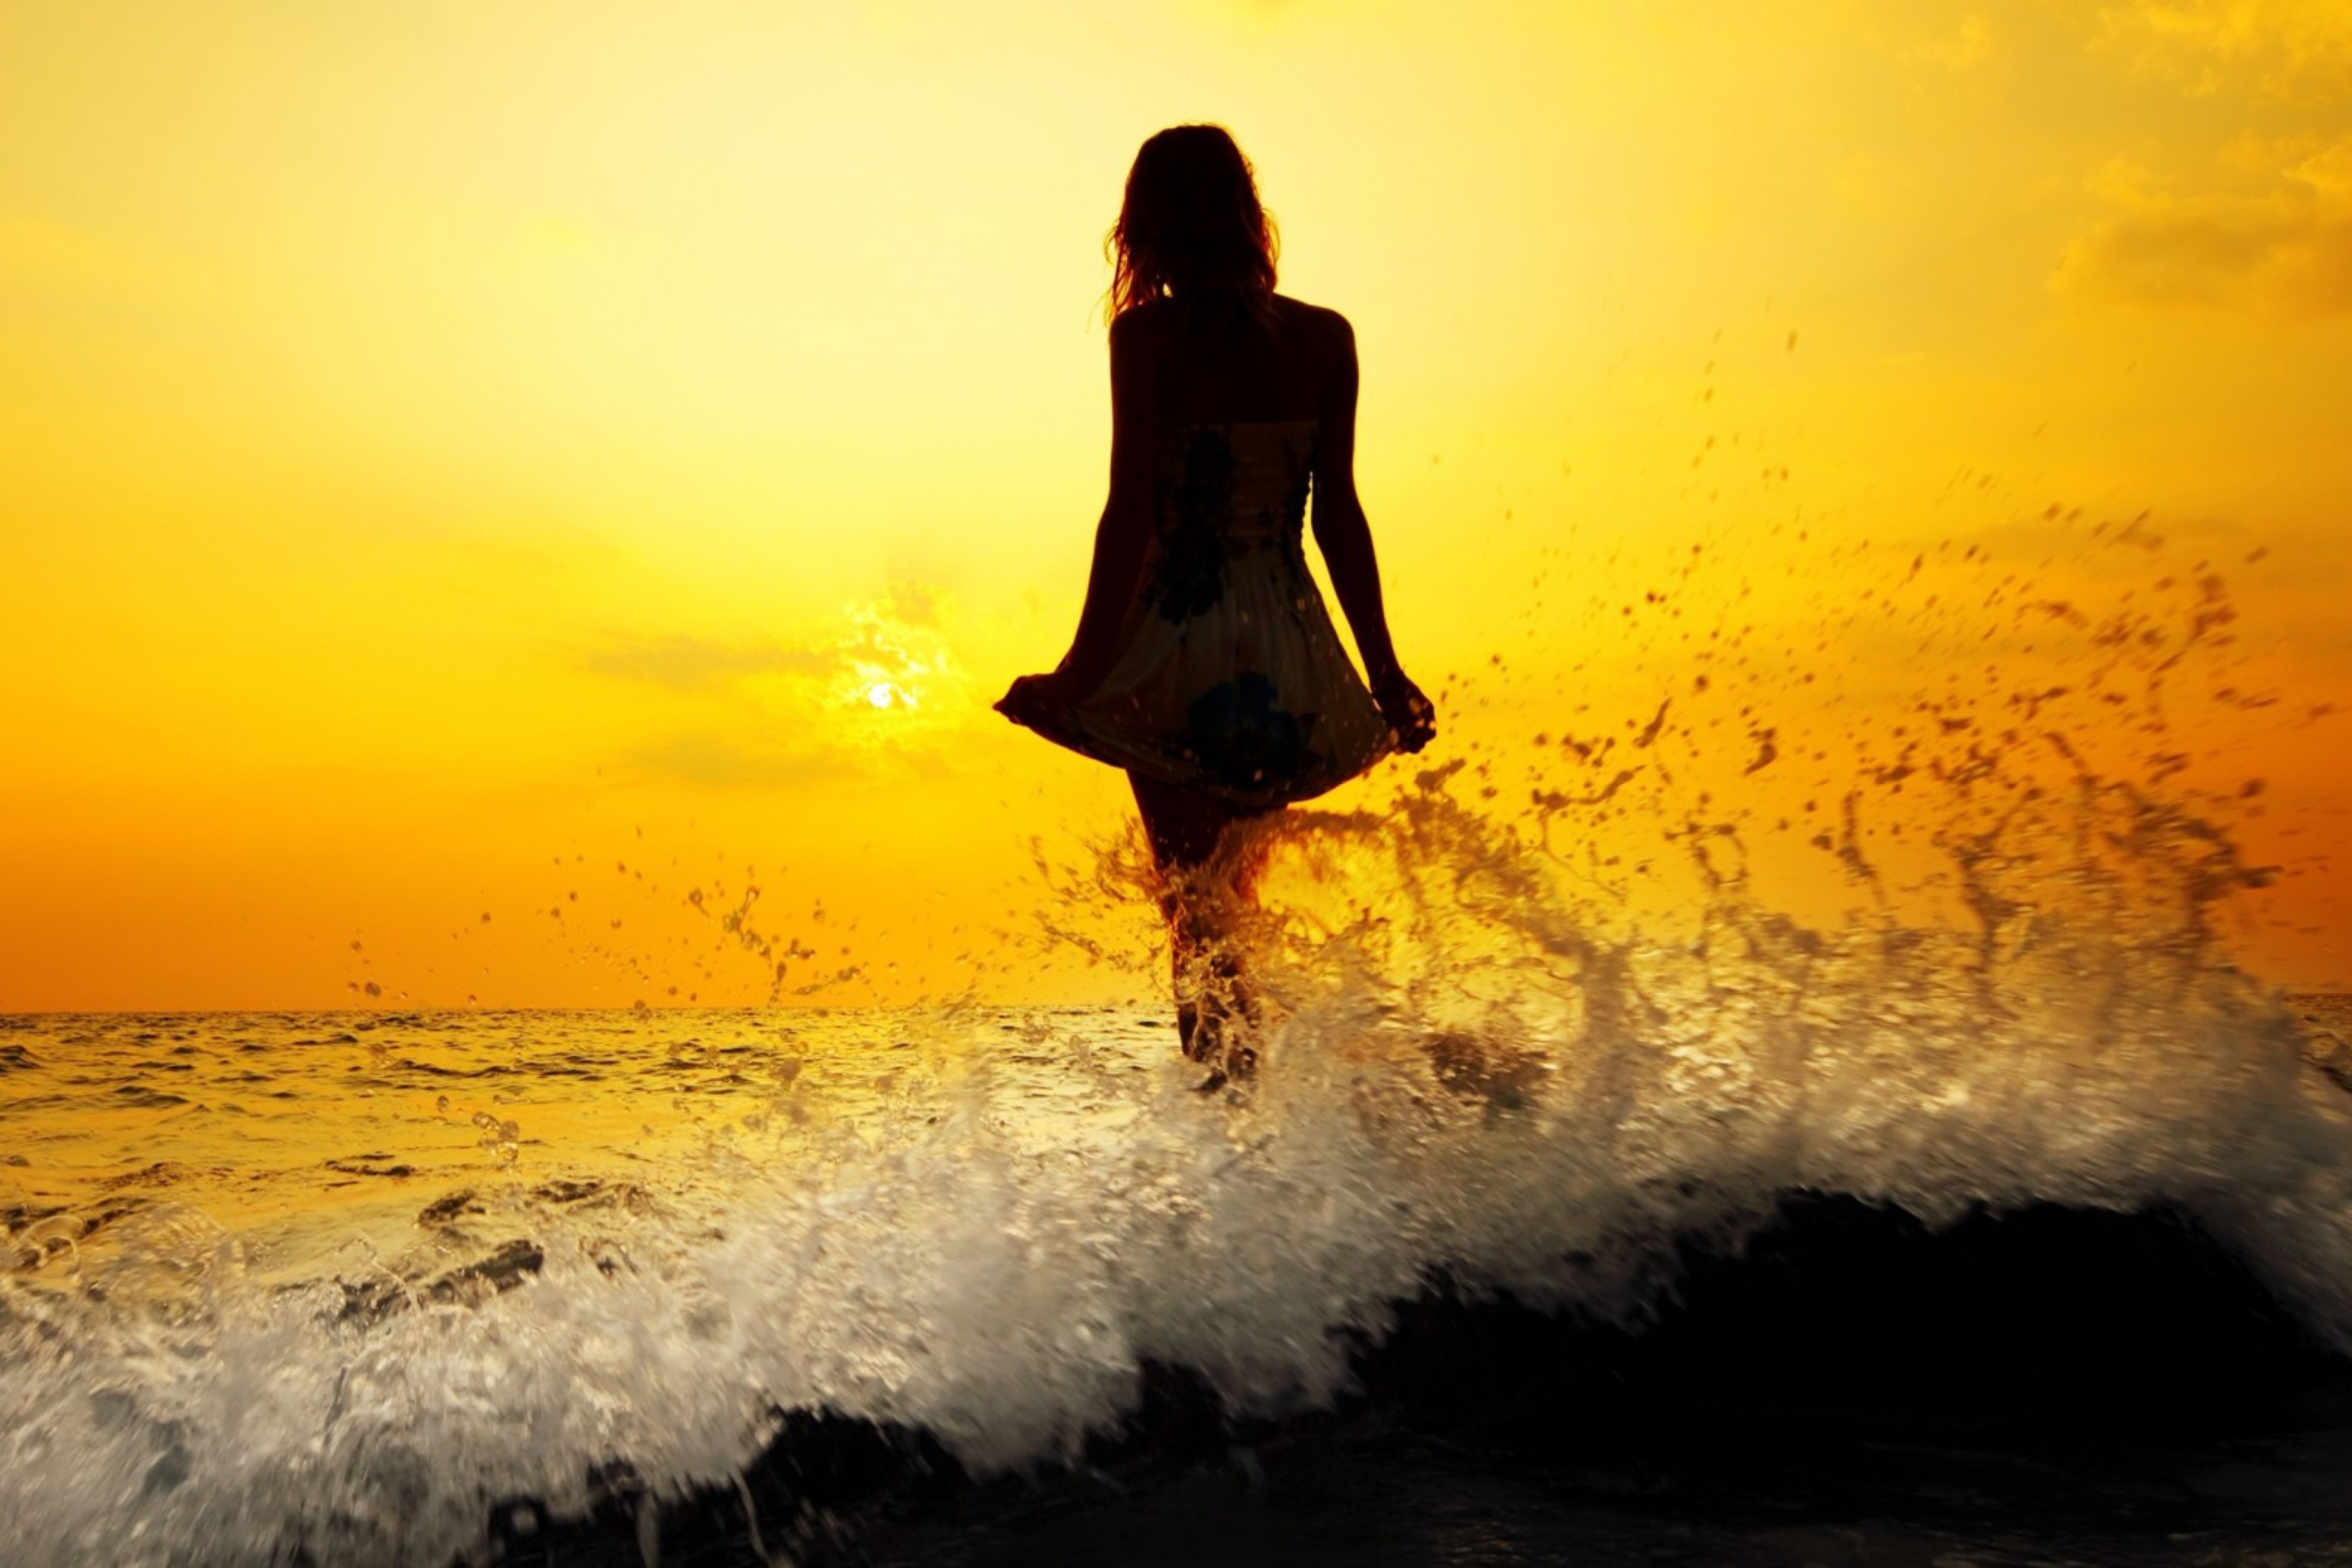 Girl Silhouette In Sea Waves At Sunset wallpaper 2880x1920